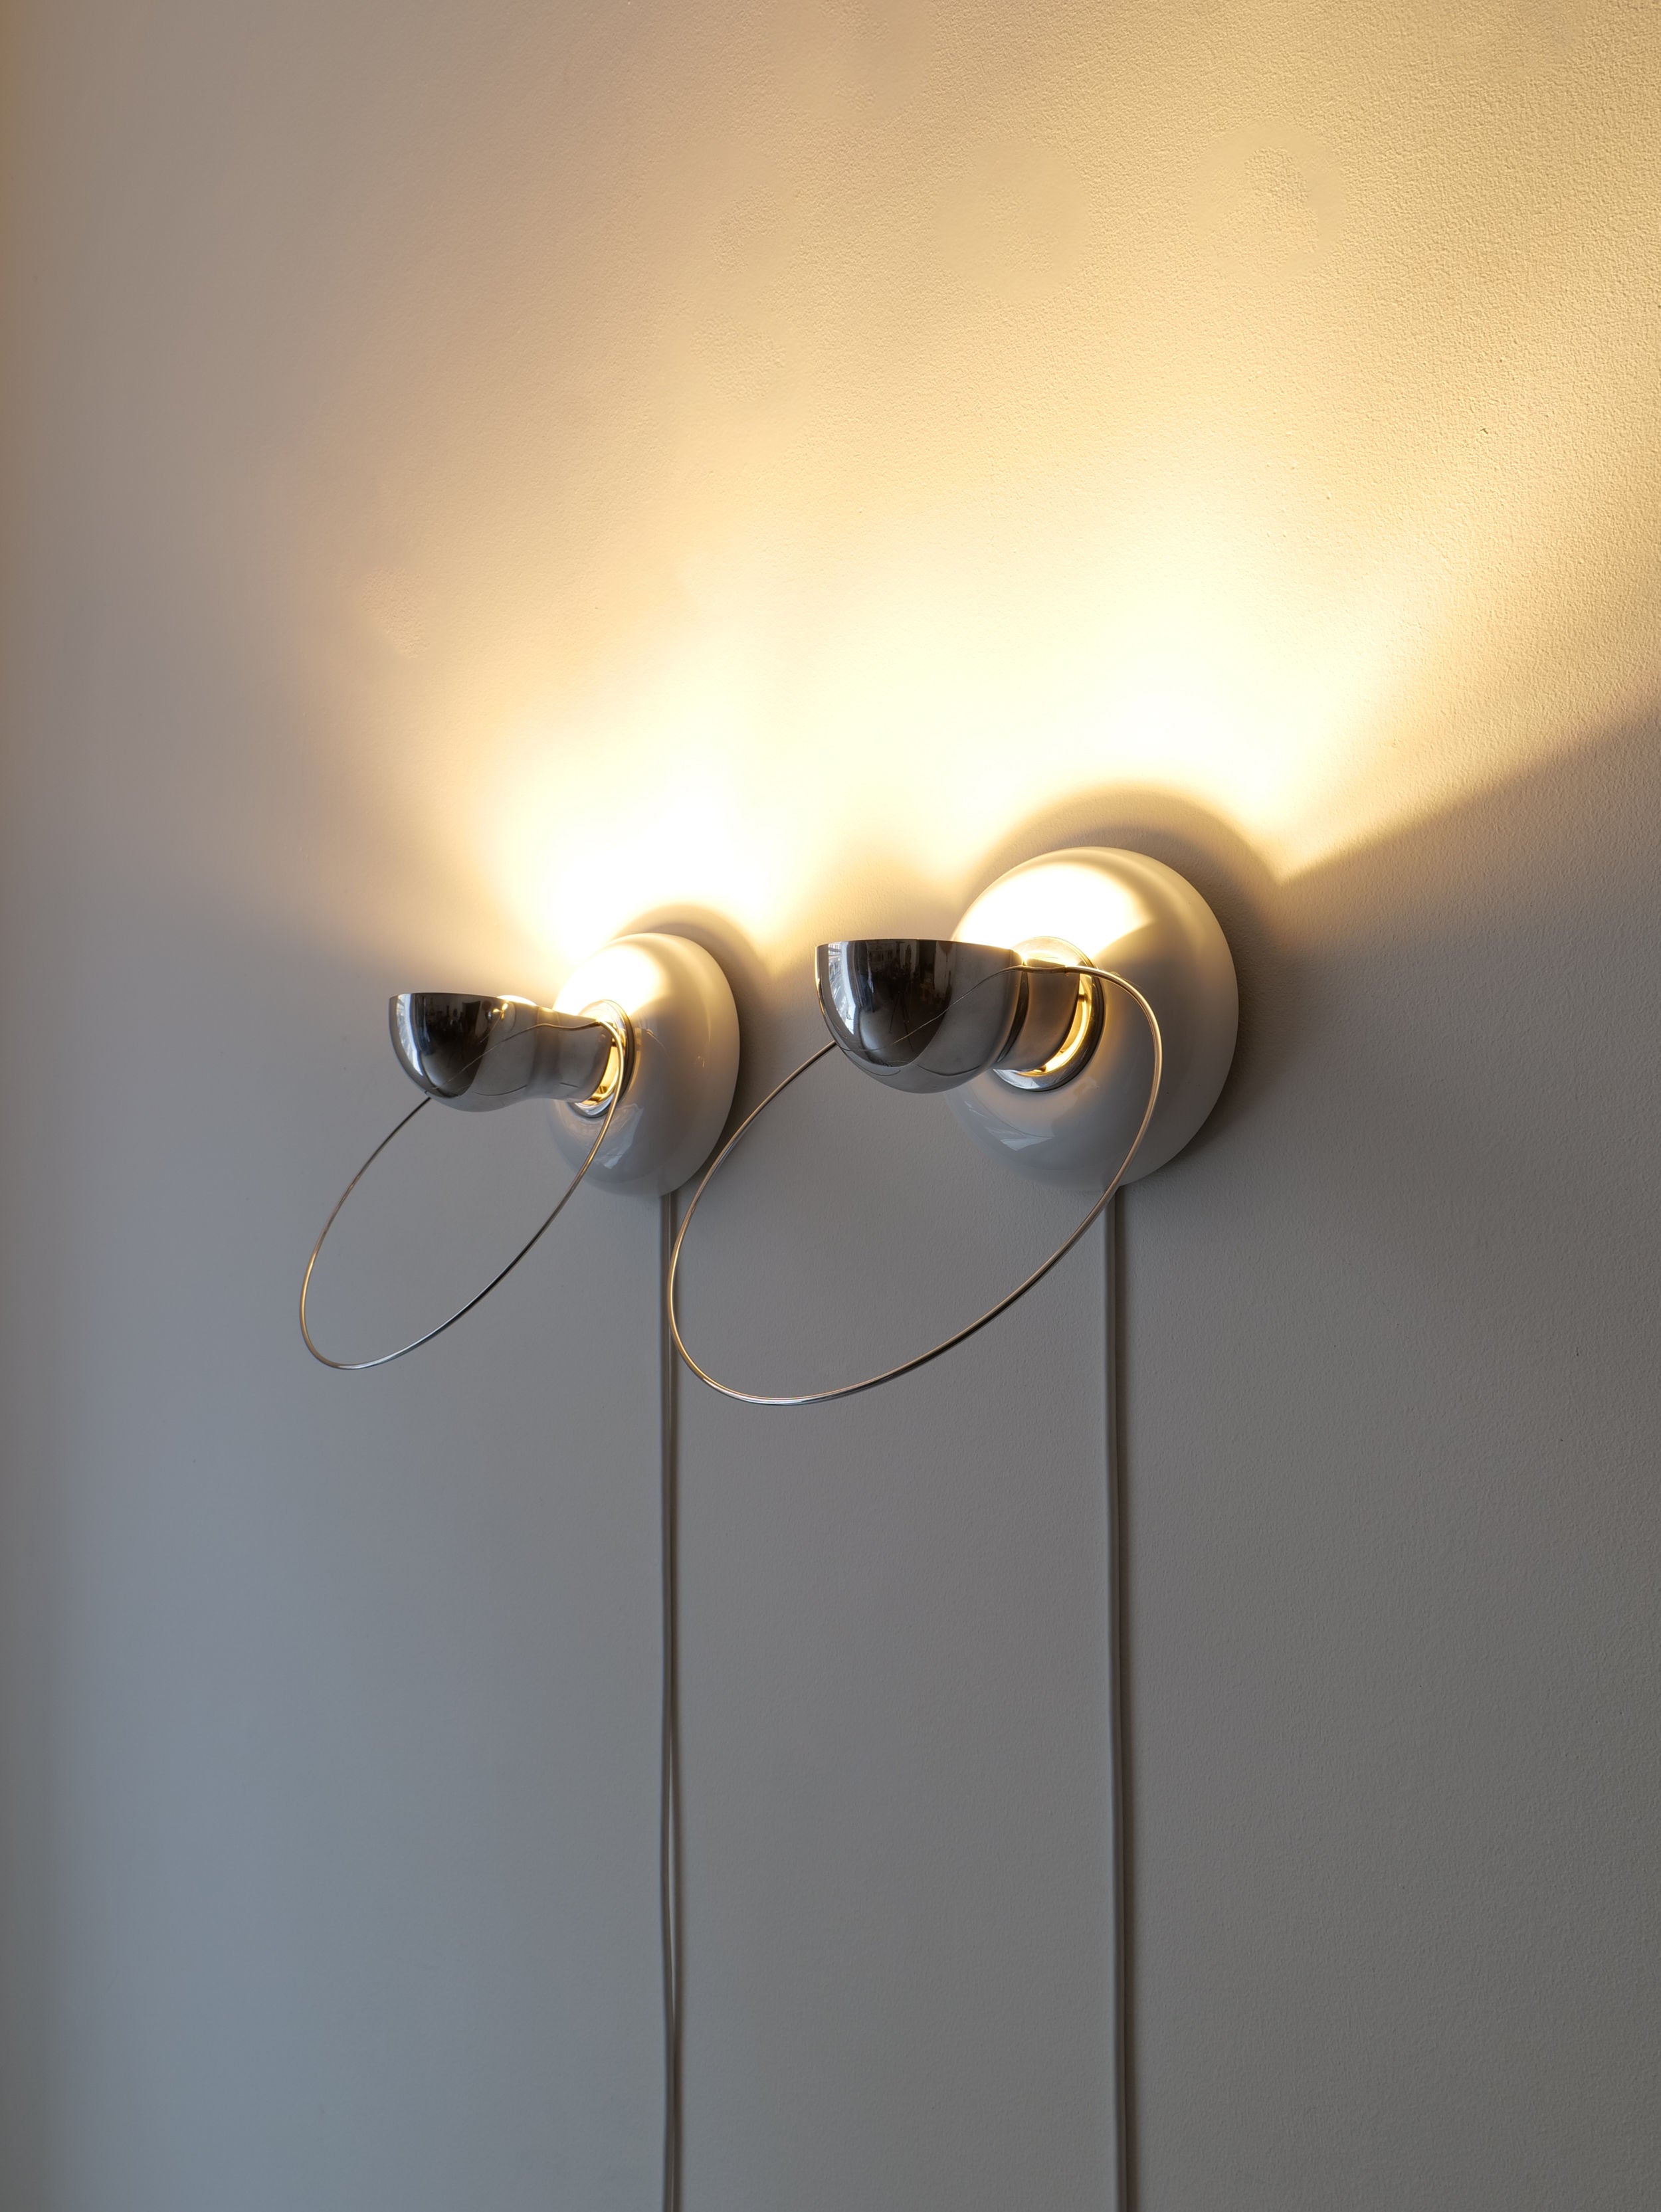 Bisbi Wall Sconces designed by Achille Castiglioni to elevate any space